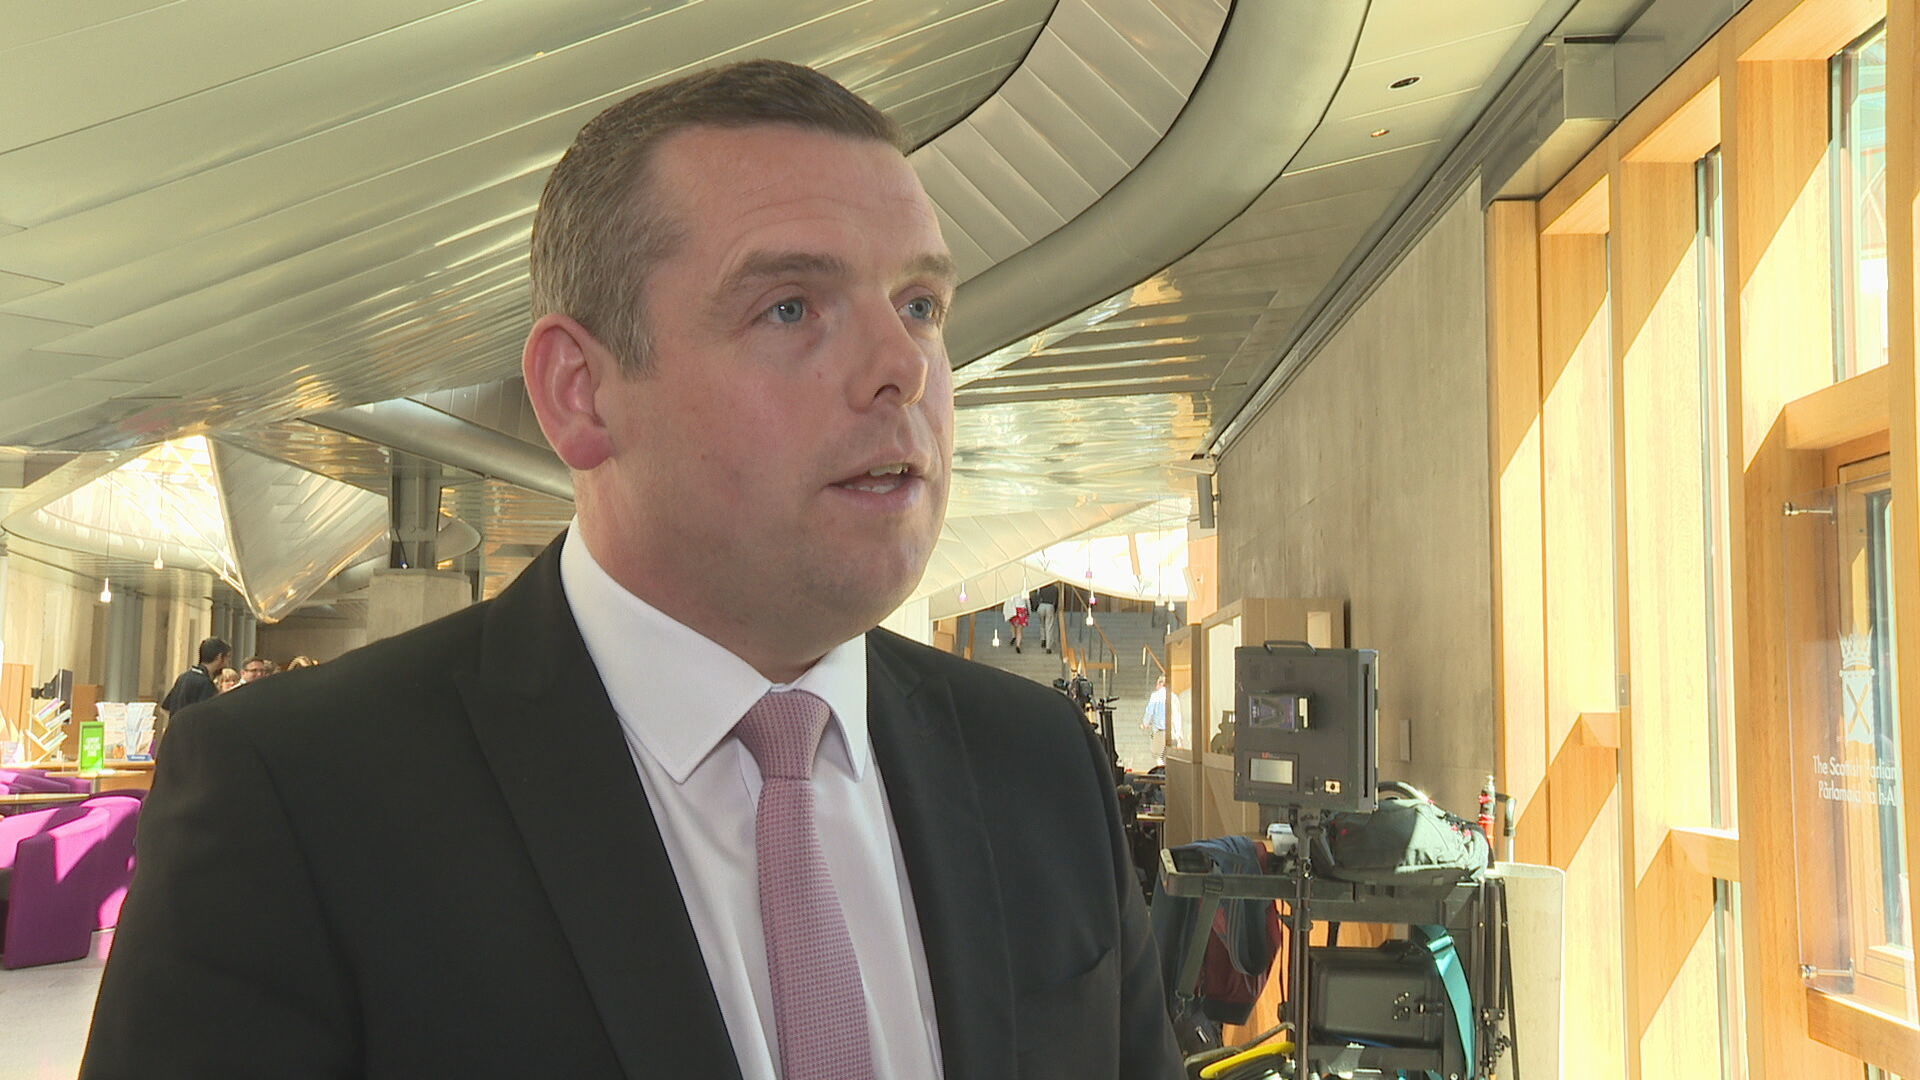 Douglas Ross's party has faced low polling numbers amid a surge in Labour support.